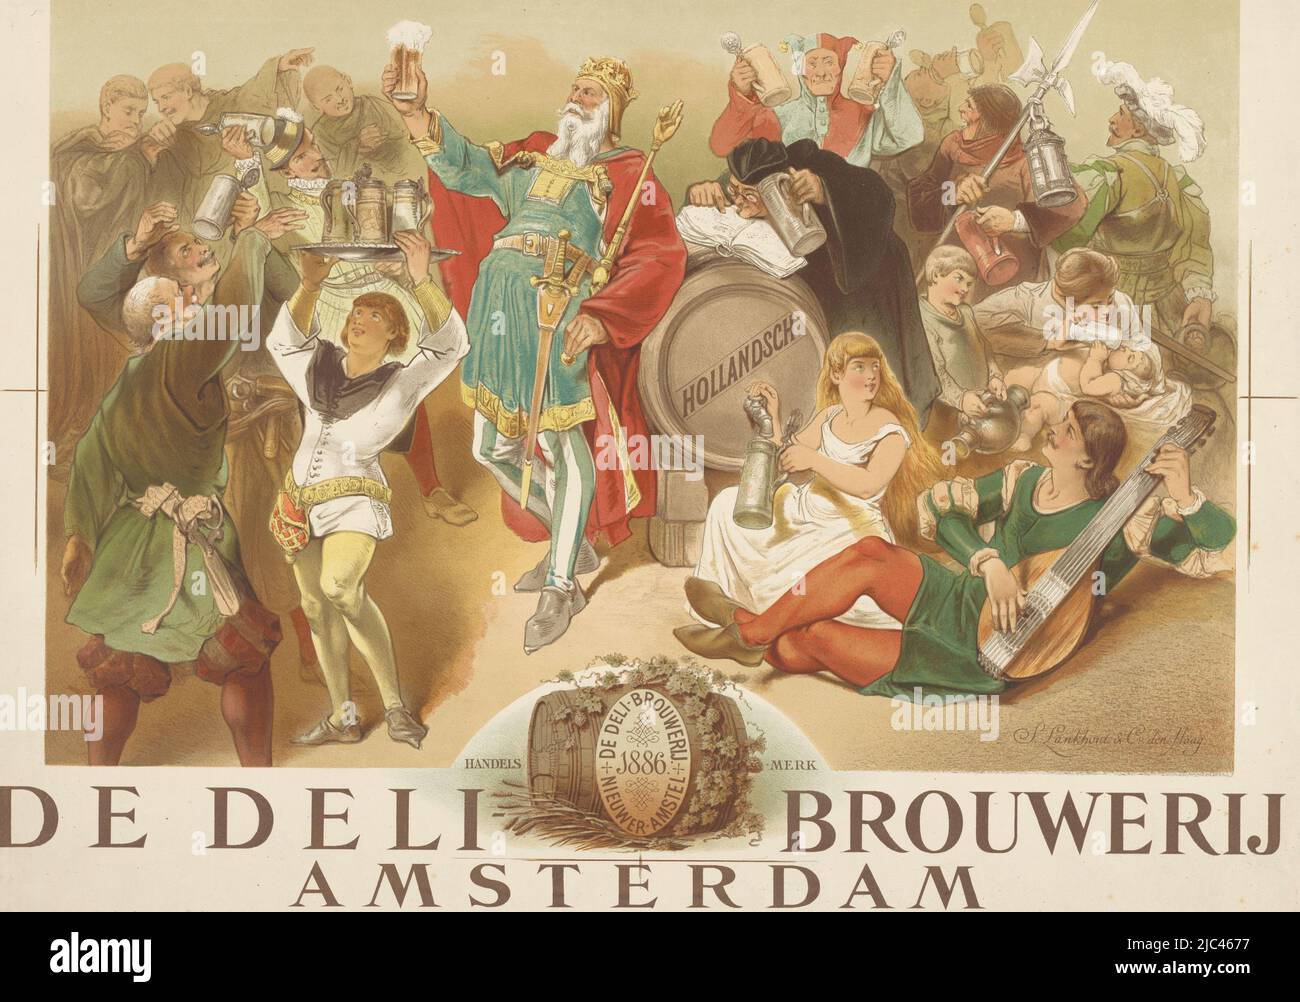 In the center, King Gambrinus stands leaning against a barrel, holding in his left hand a scepter, in his raised right hand a glass filled with beer. He is surrounded by a crowd of persons. To the right of the barrel a young girl is seated, who is filling a crucible from it, next to her a young man is sitting playing the cither. On the left a young man is holding a dish with a number of beers above his head: In the R.O.H.: S. Lankhout & Co. the Hague. In the middle of the margin and the lower part of the print is a barrel wreathed with hops, in front of which is an oval shield with the Stock Photo